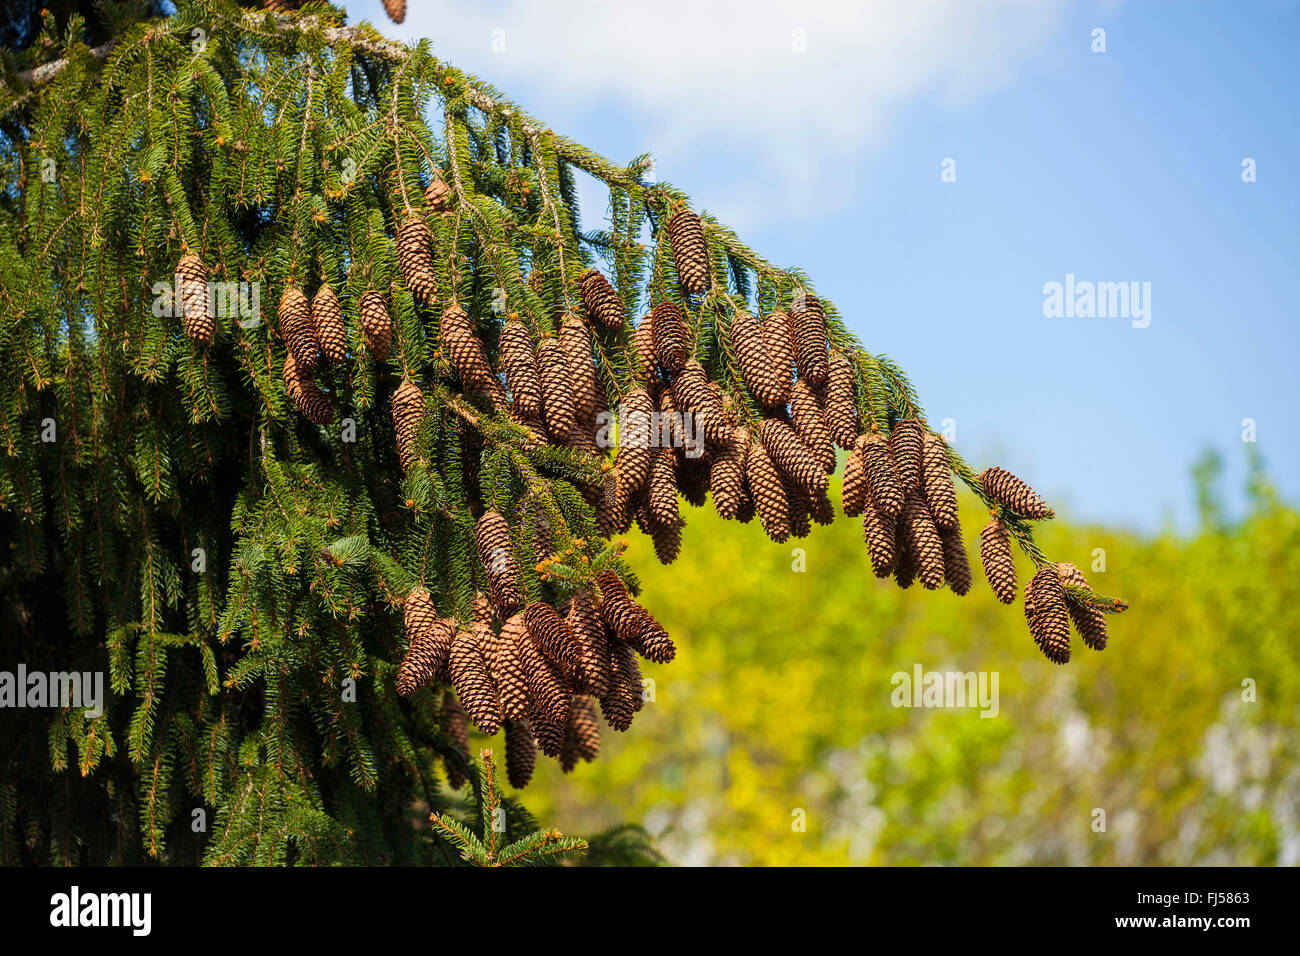 Norway spruce (Picea abies), branch with cones, Germany, Hesse Stock Photo